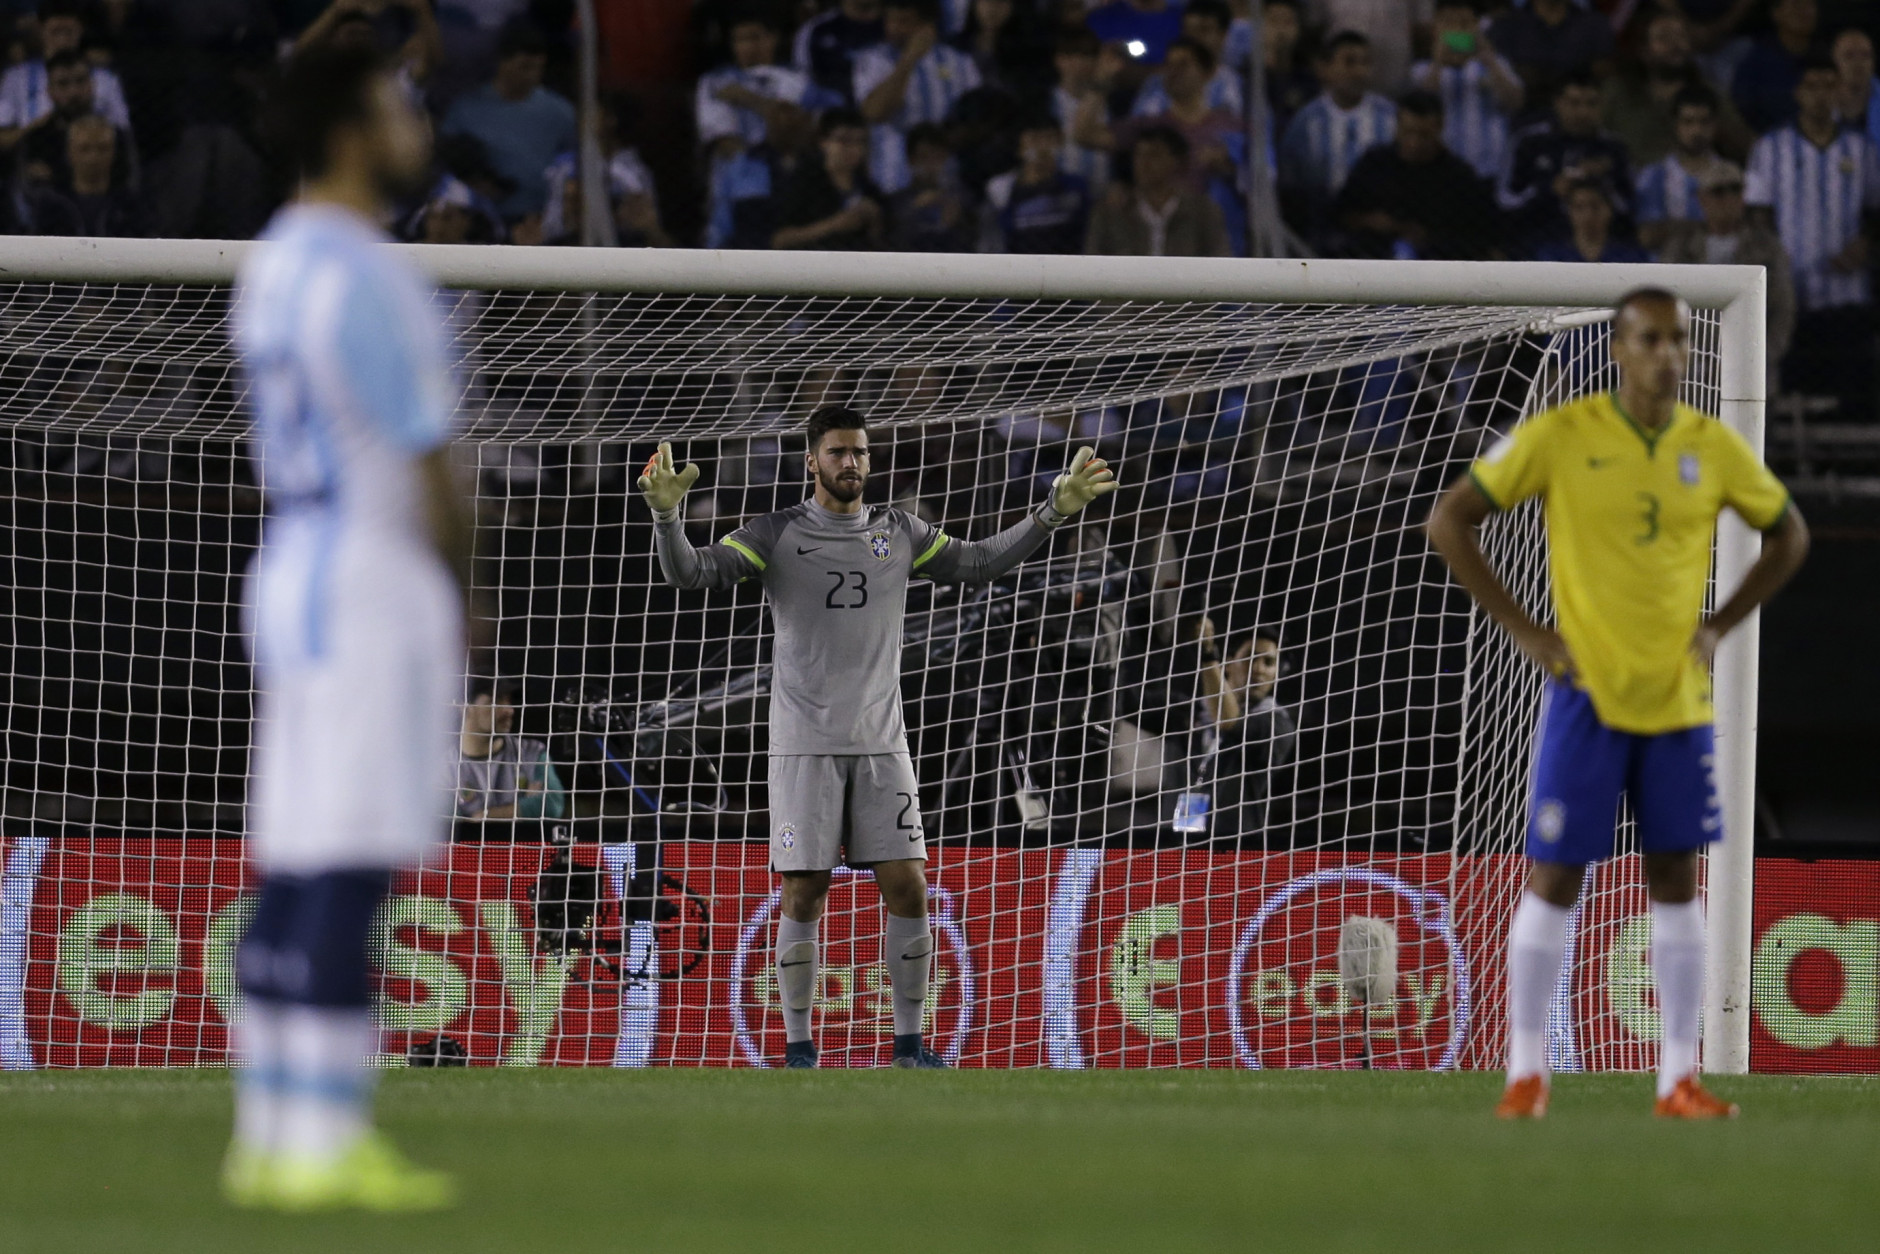 Brazil's goalkeeper Alisson, center, defender Miranda, right, and Argentina's Ezequiel Lavezzi observe a minute of silence to pay respect to the victims of the Paris attacks prior to a 2018 World Cup qualifying soccer match in Buenos Aires, Argentina, Friday, Nov. 13, 2015. Several dozen people were killed in attacks around Paris on Friday, French President Francois Hollande said, announcing that he was closing the countrys borders and declaring a state of emergency. (AP Photo/Victor R. Caivano)